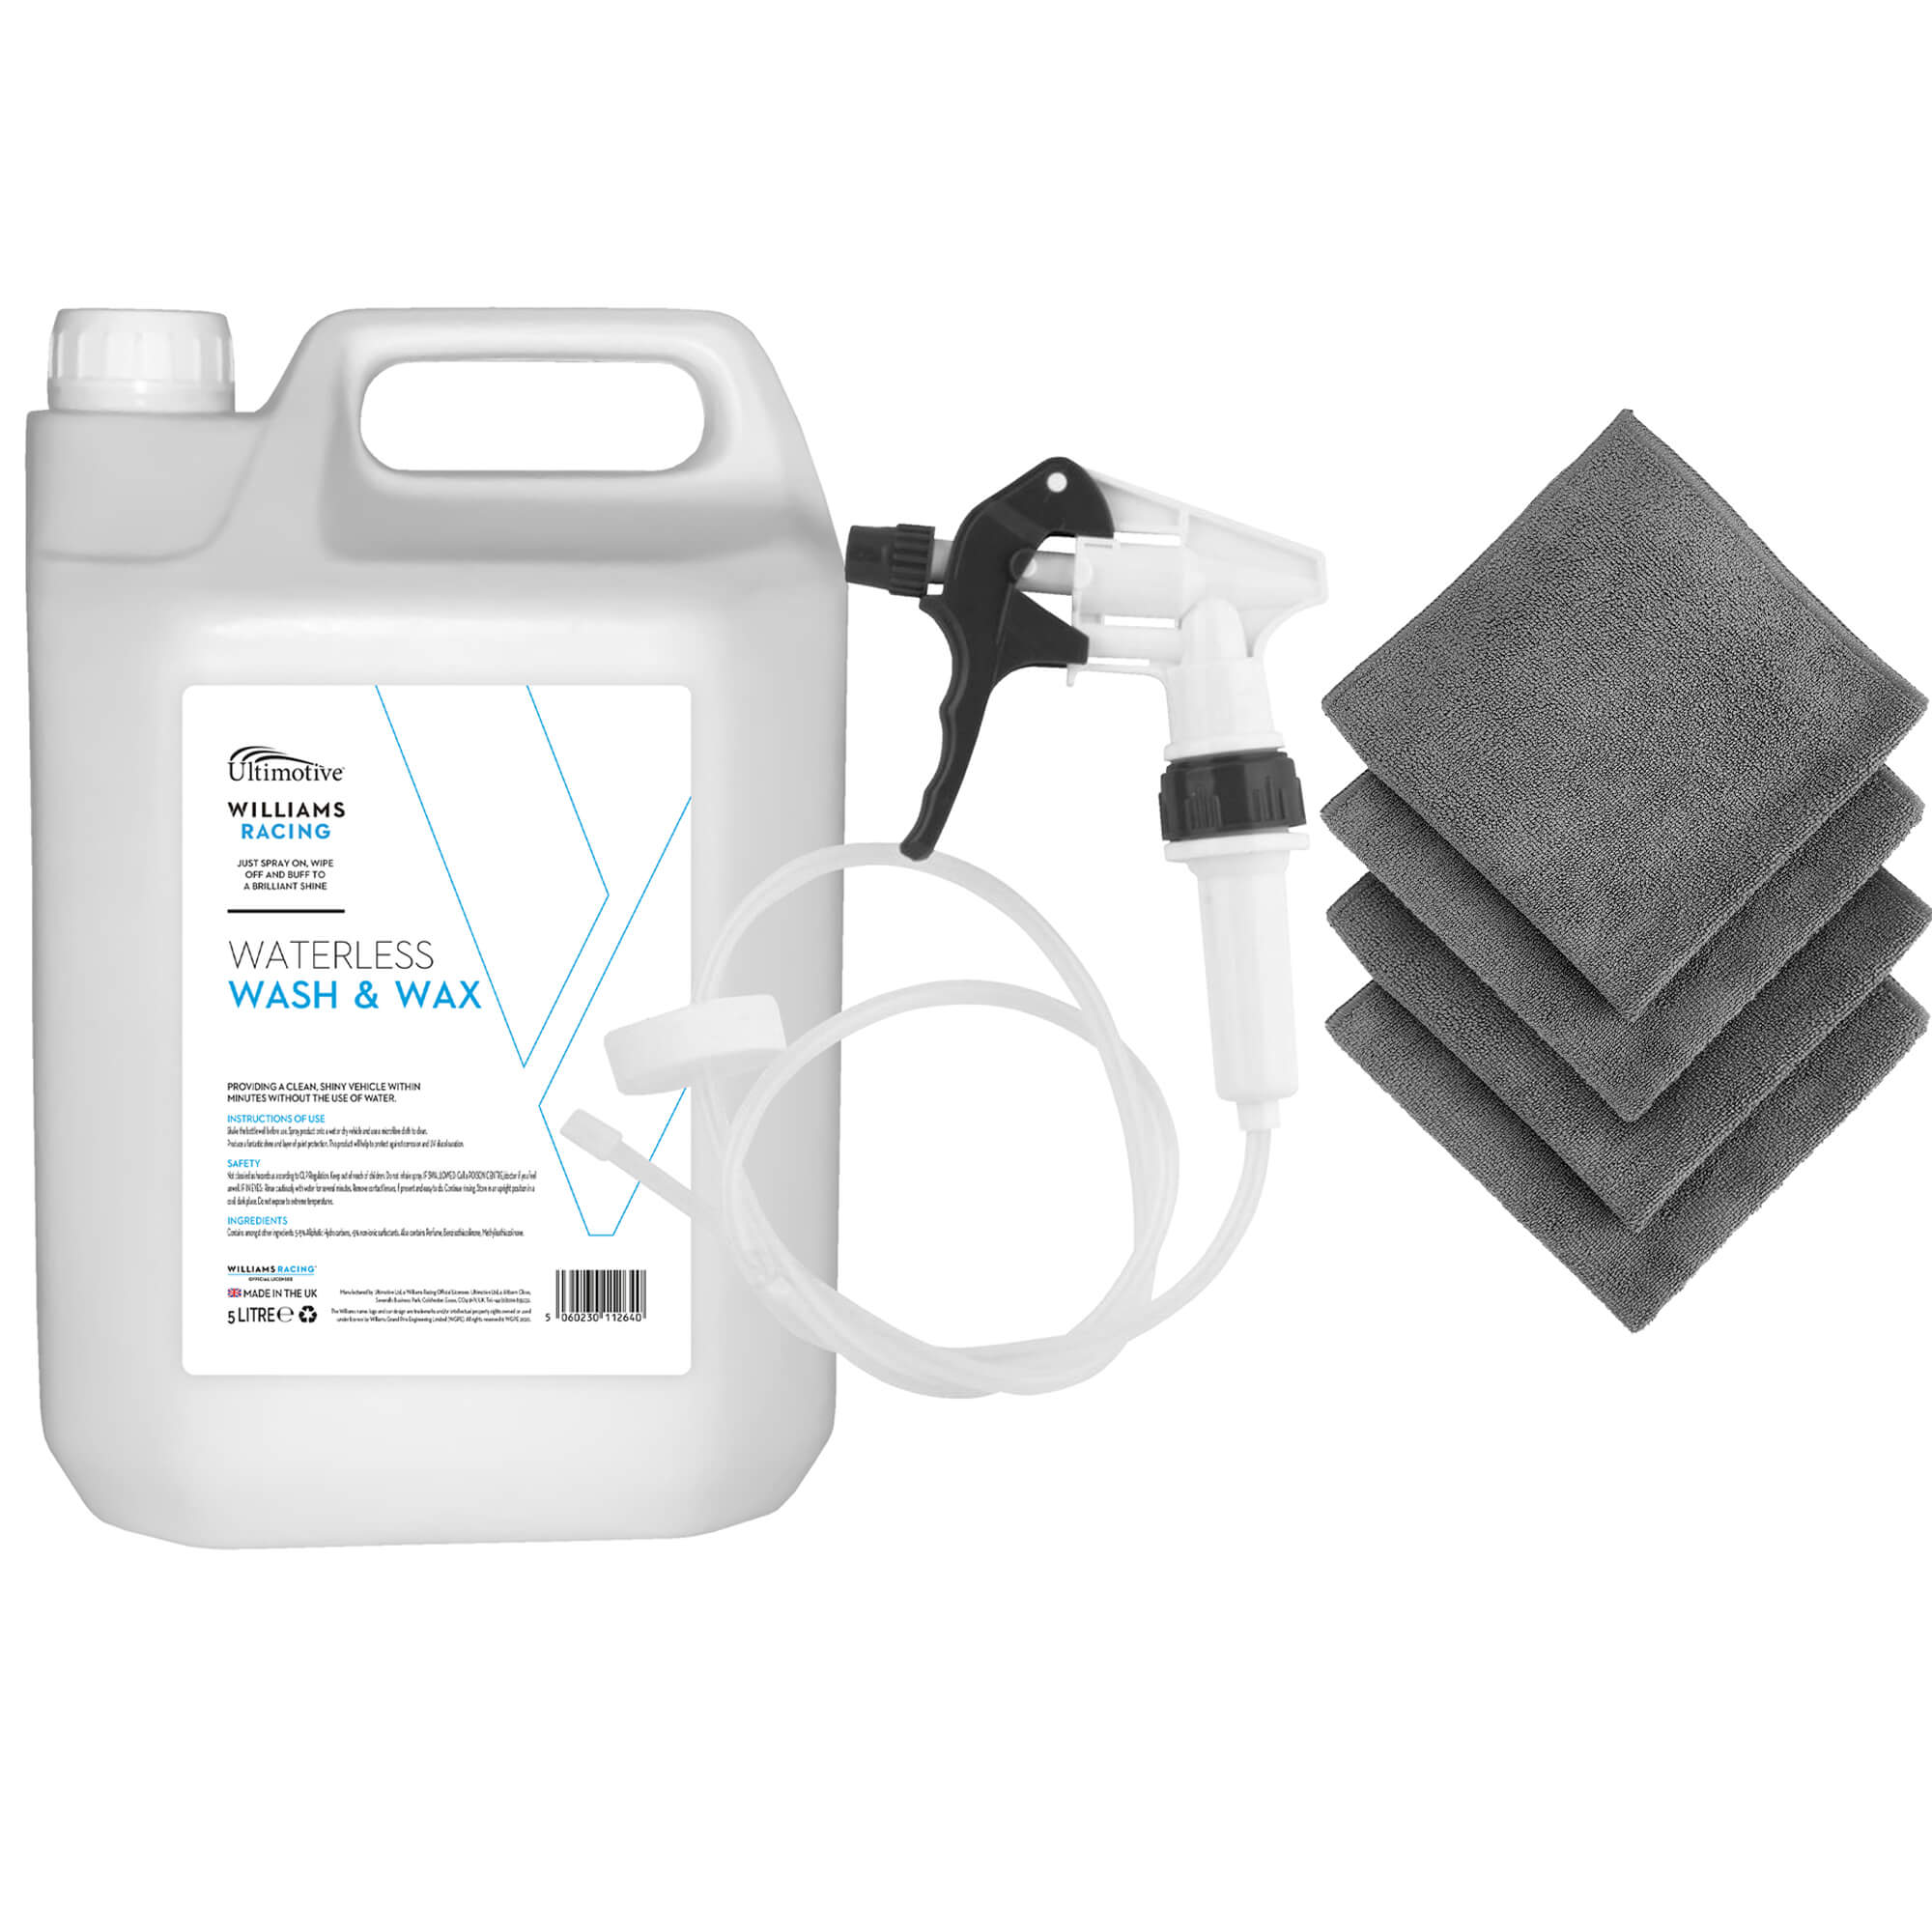 Williams Waterless Wash & Wax 5L (with Long Hose Trigger + 4 Microfibre Cloths)